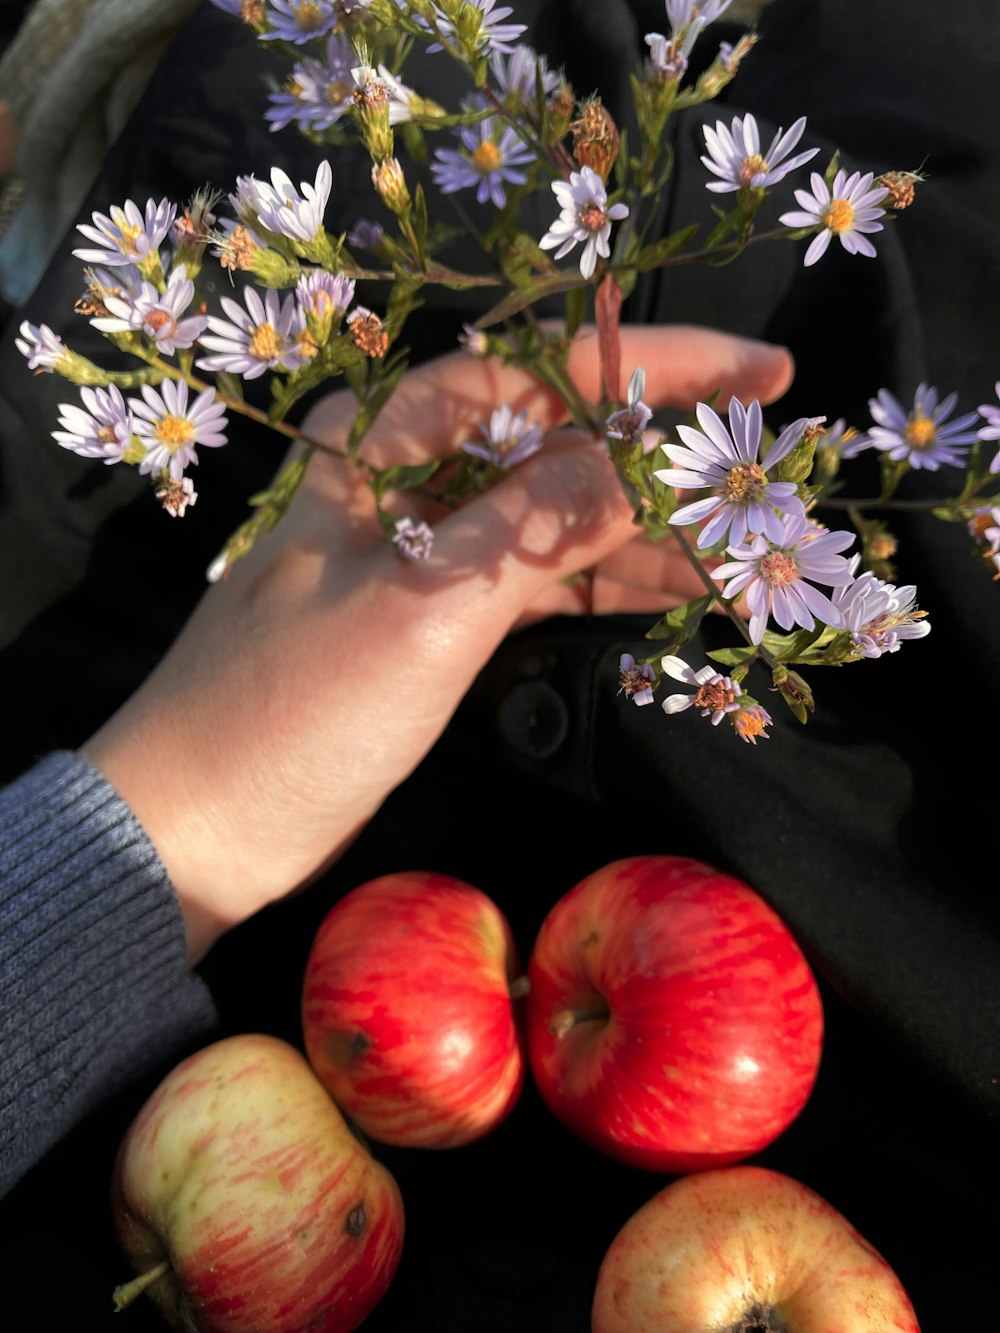 a person holding a bunch of flowers next to some apples